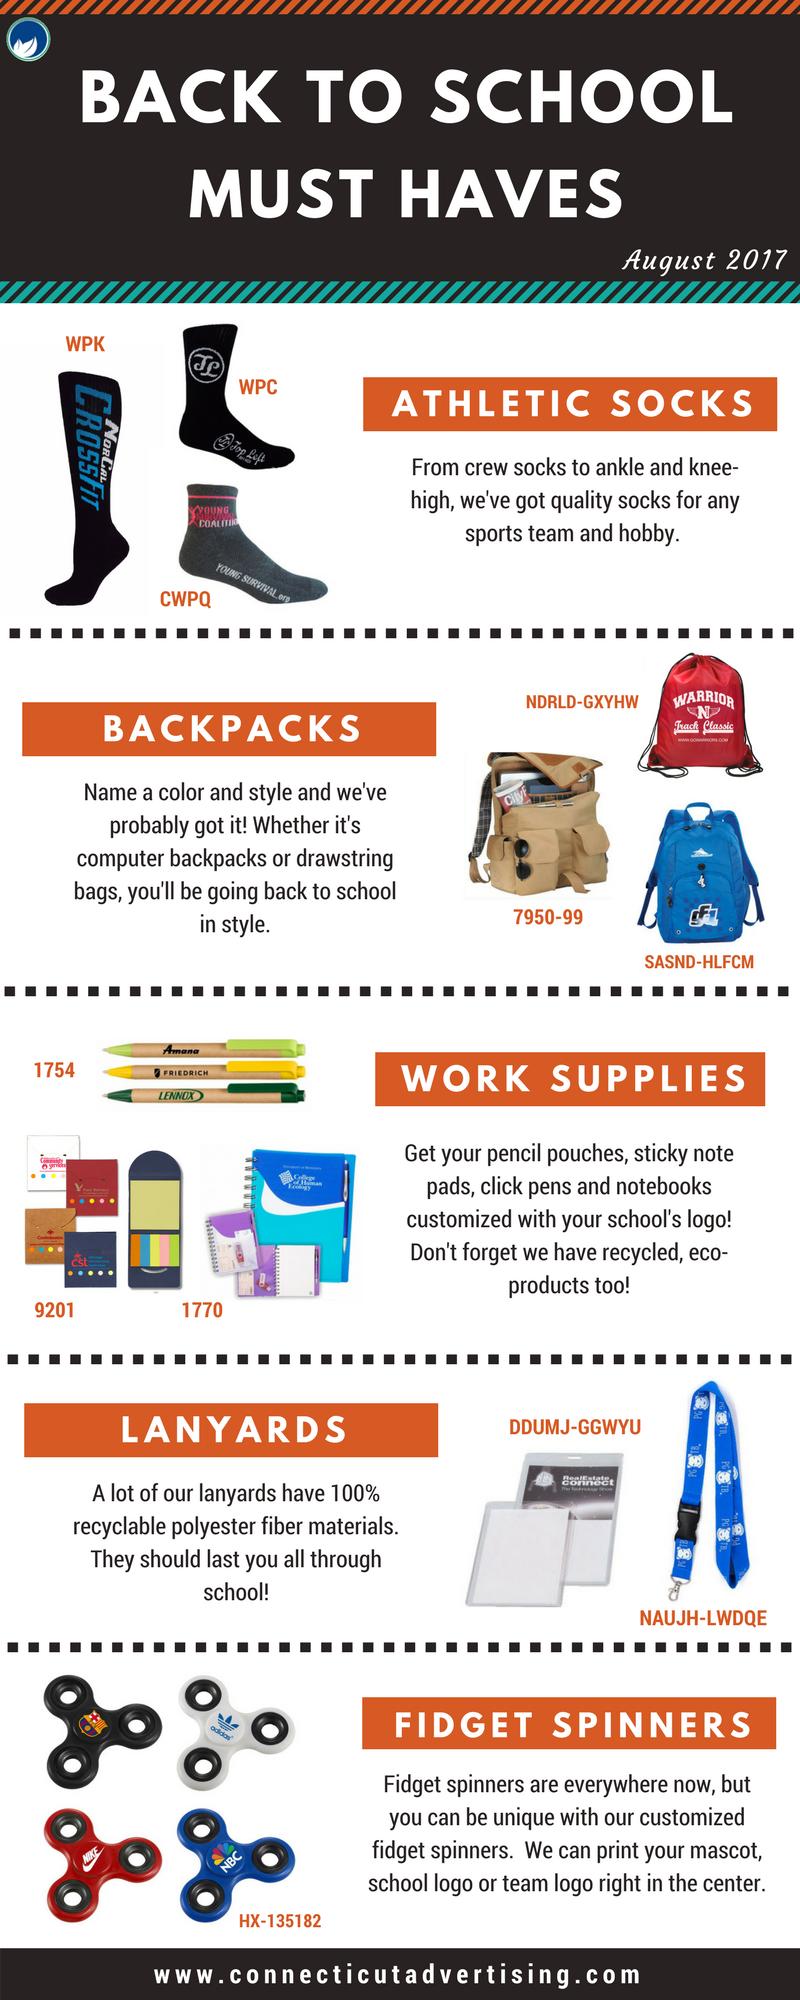 Back to School Must Haves - Connecticut Advertising